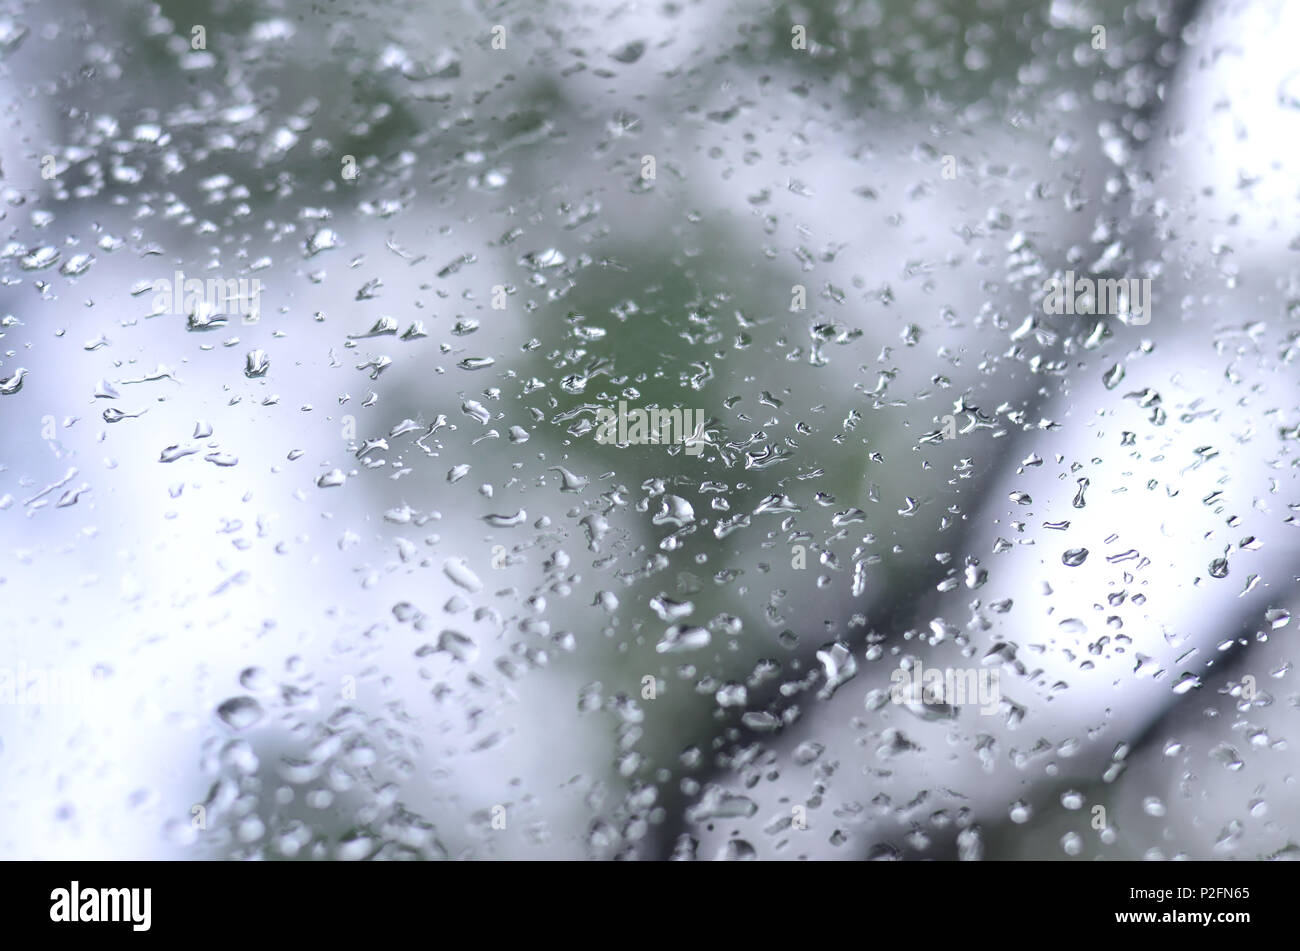 A photo of rain drops on the window glass with a blurred view of the blossoming green trees. Abstract image showing cloudy and rainy weather condition Stock Photo